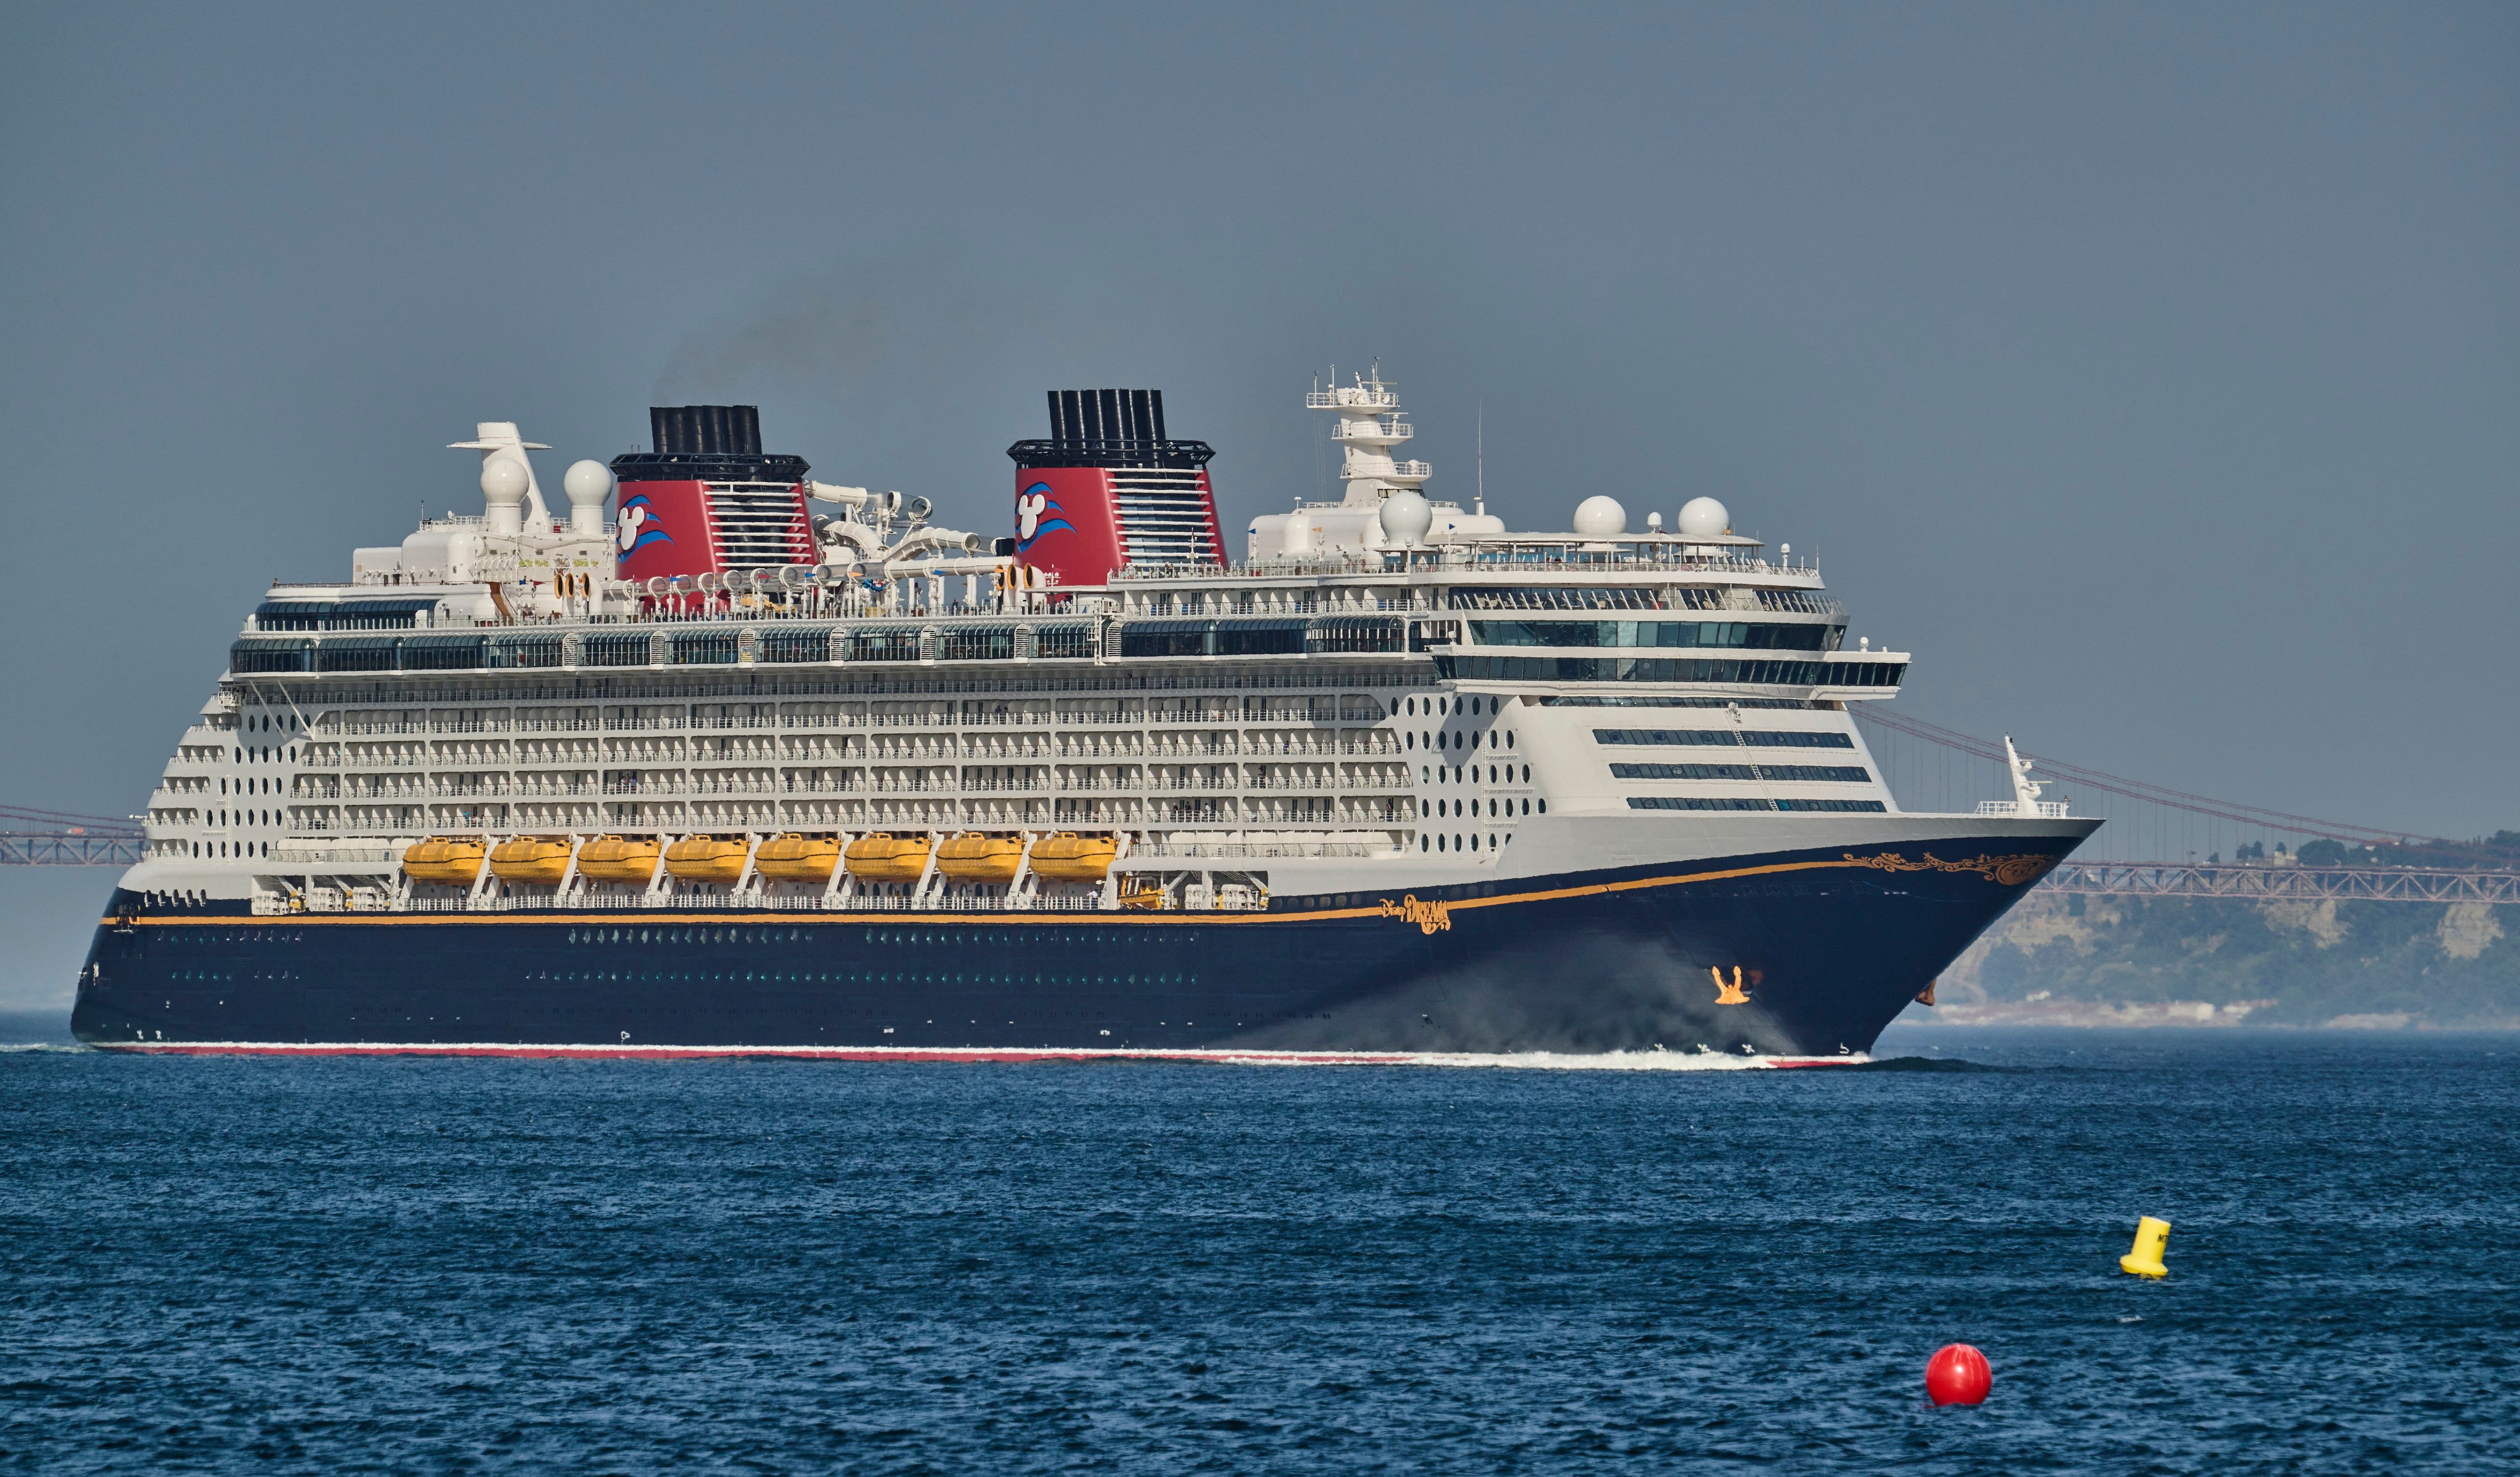 Disney Dream, one of the company’s cruise ships, in Portugal last year. Photo: Getty Images